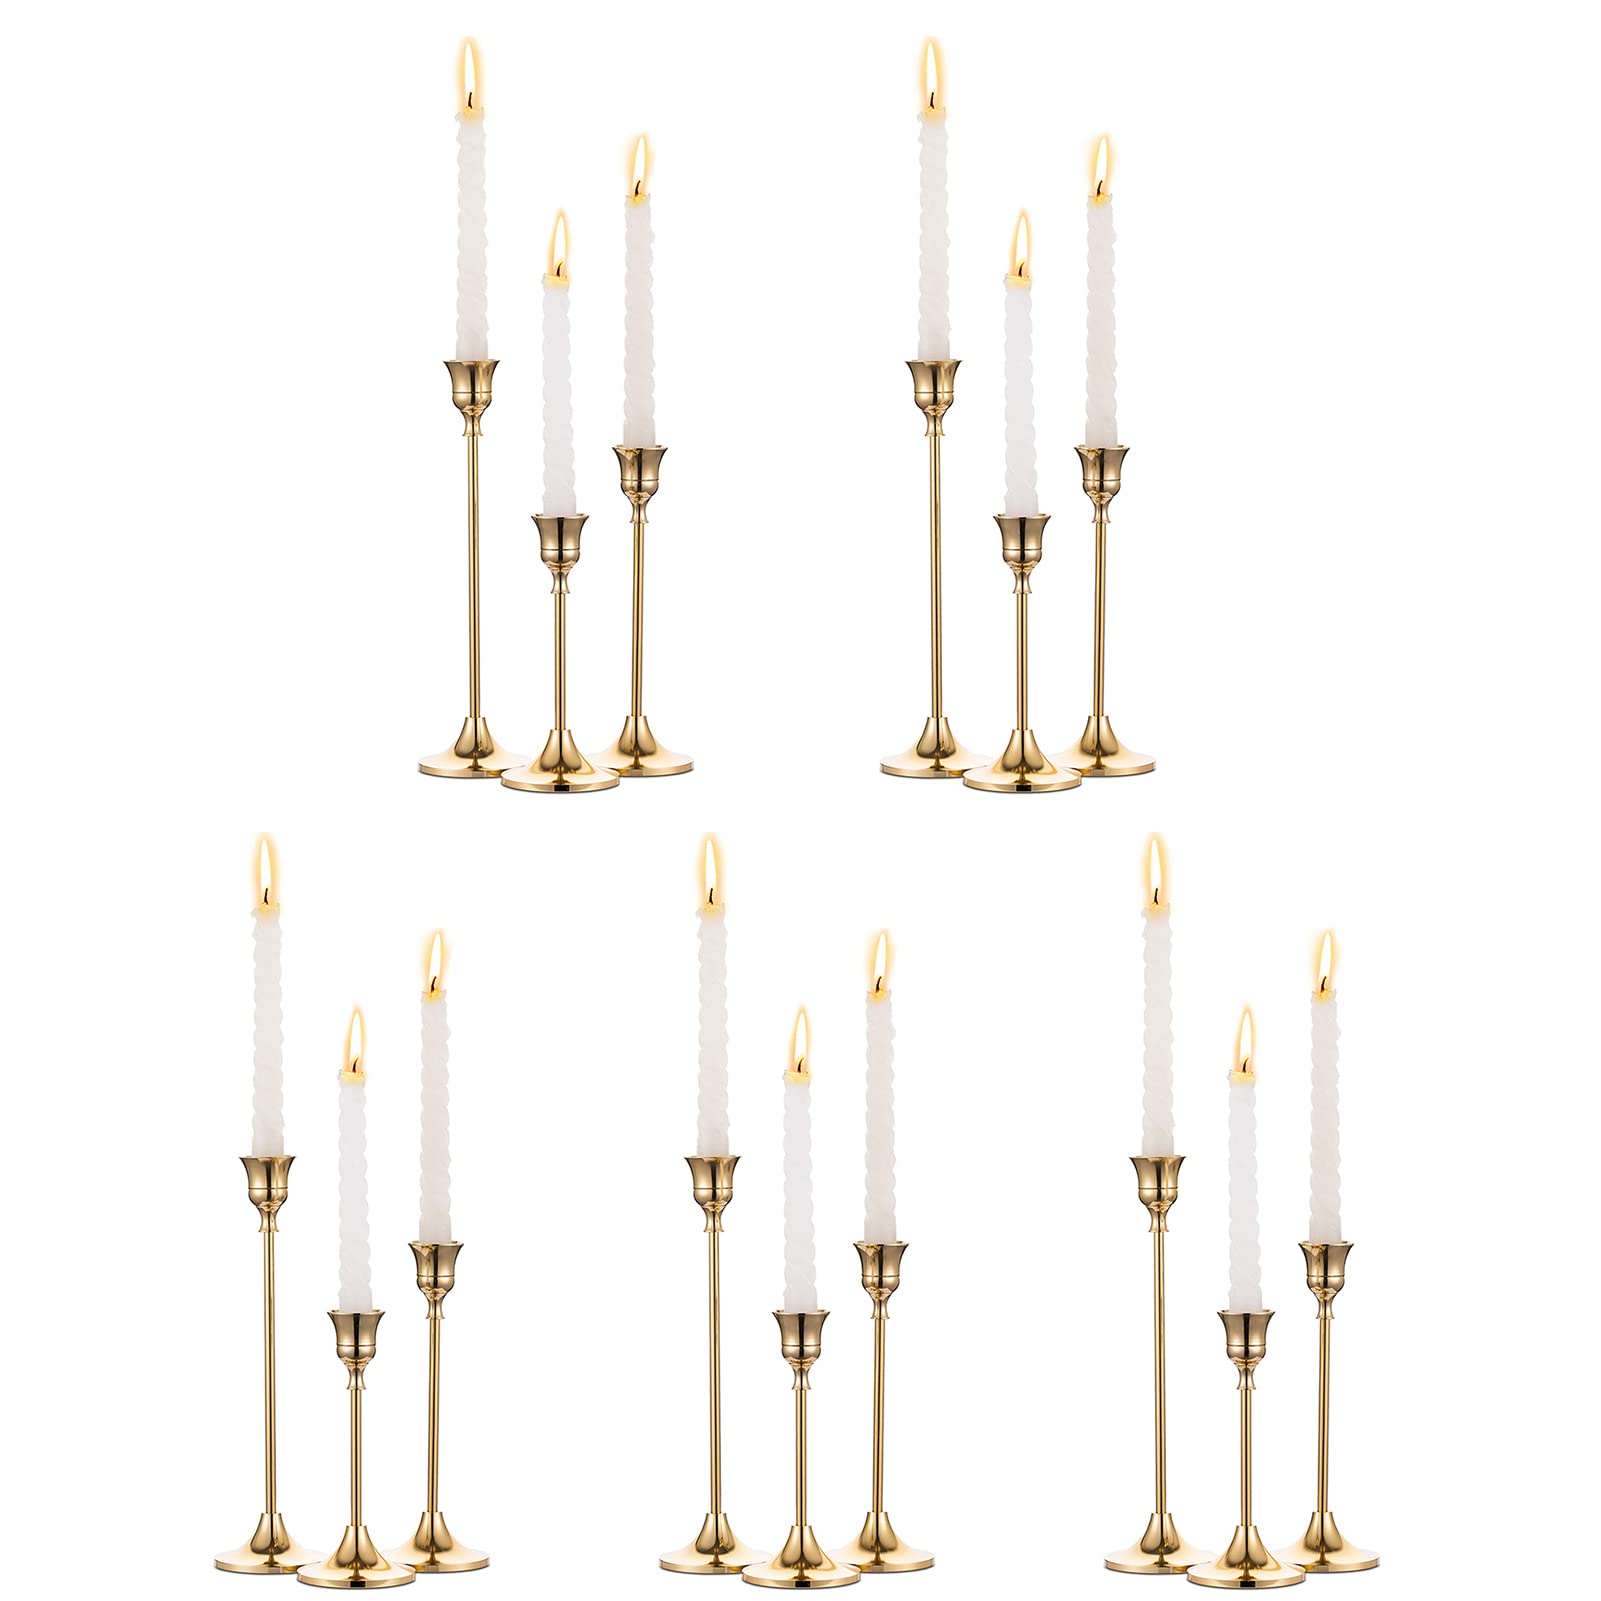 Nuptio Candlestick Candle Holders 15 Pcs Candle Stick Holder Gold Taper Candle Holder Candle Stand for Wedding Party Thanksgivin